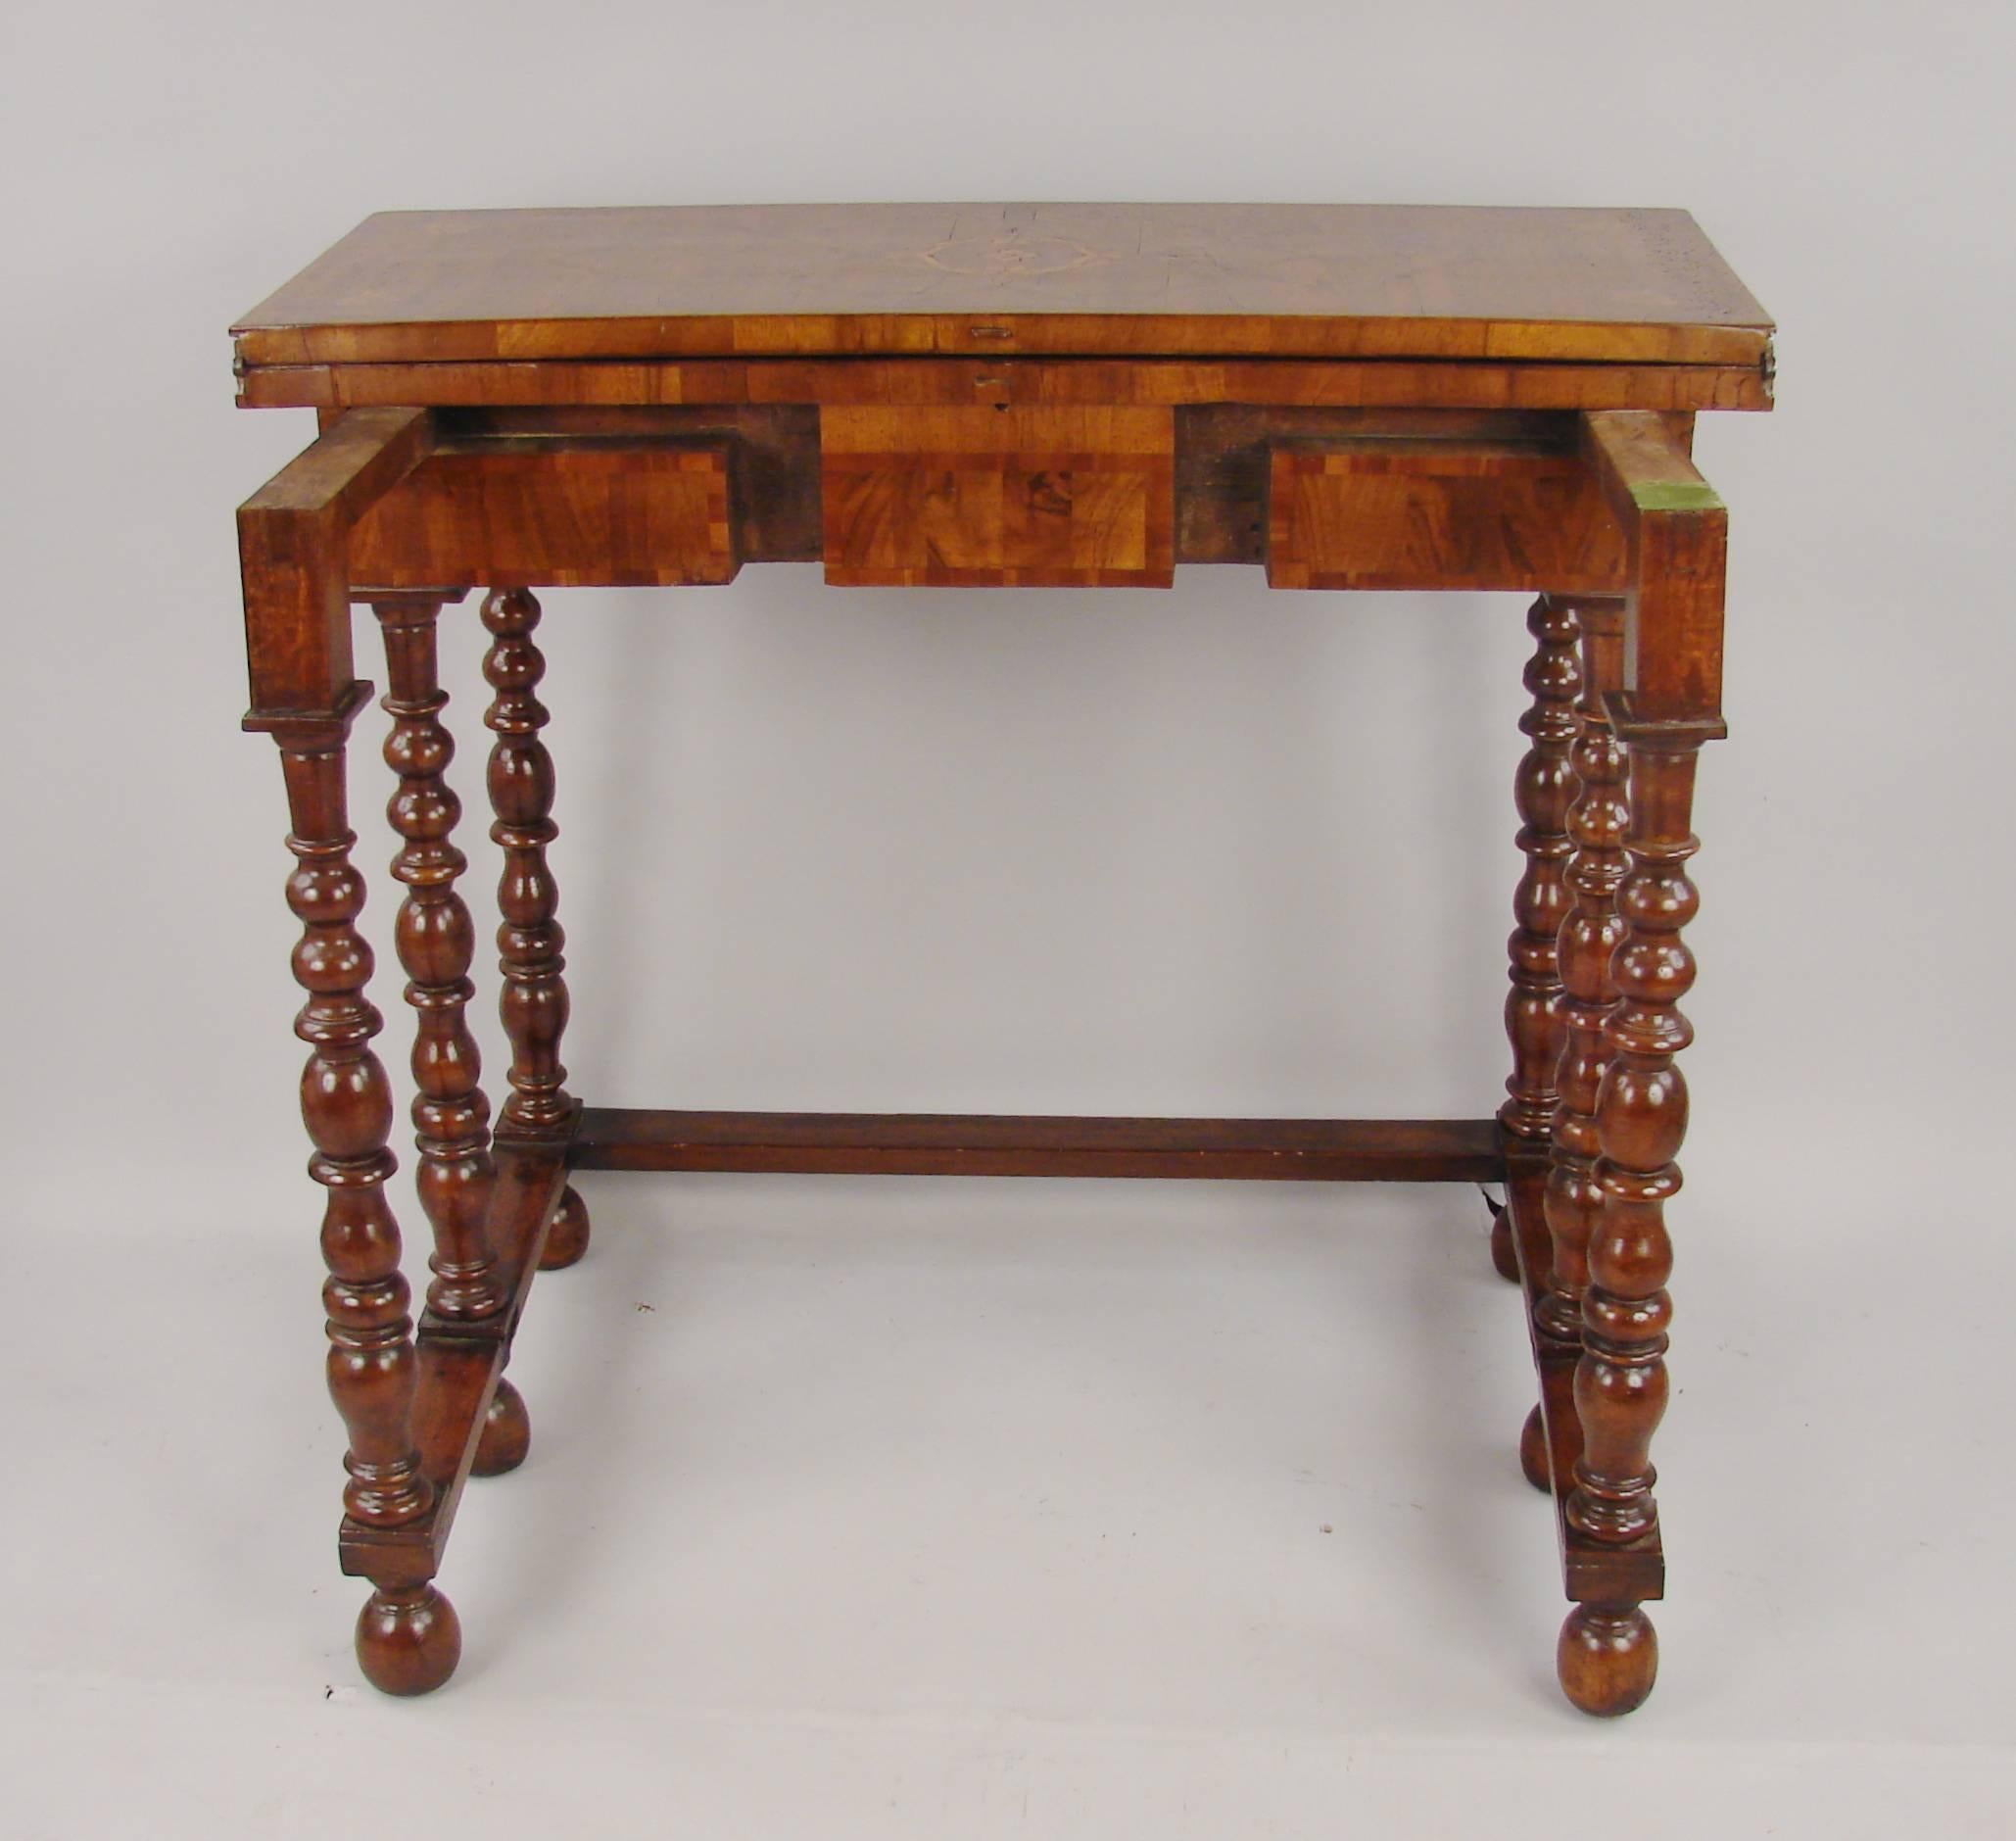 A William and Mary walnut marquetry inlaid gateleg game table with fold-over hinged top opening to reveal several compartments, raised on six ring-turned legs ending in ball feet and joined by flat stretchers, circa 1690.